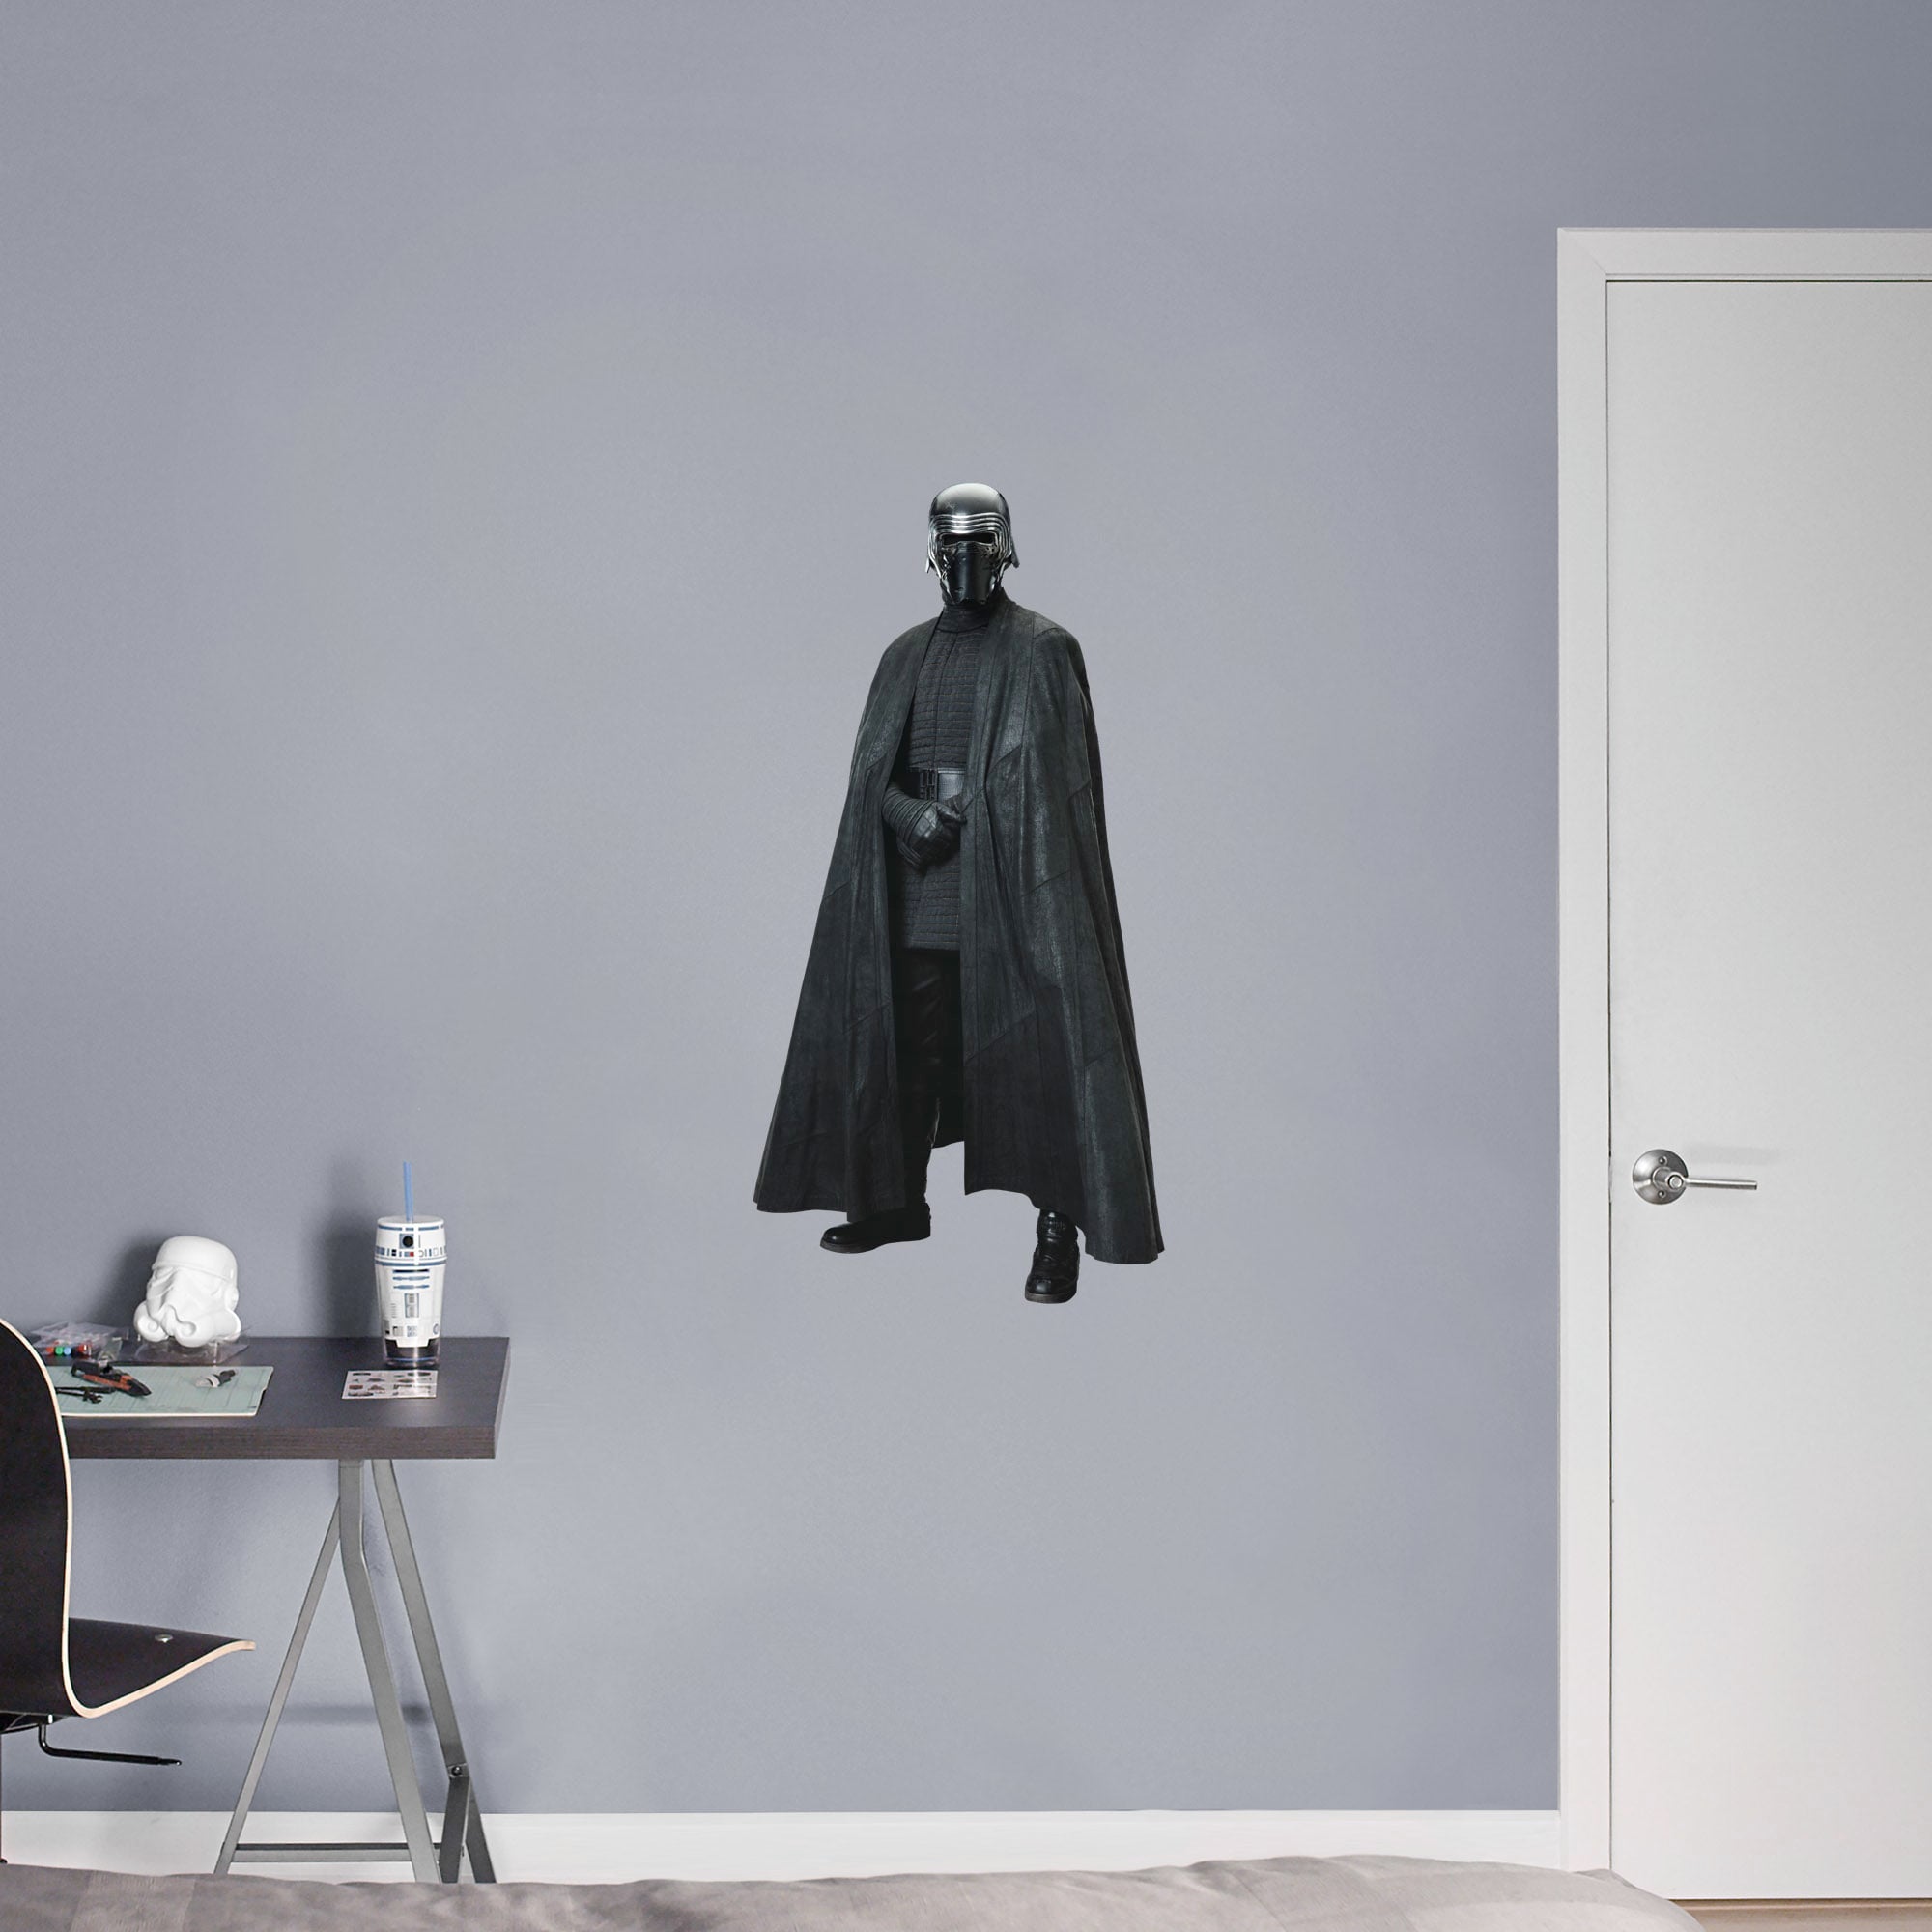 Kylo Ren - Star Wars: The Last Jedi - Officially Licensed Removable Wall Decal XL by Fathead | Vinyl